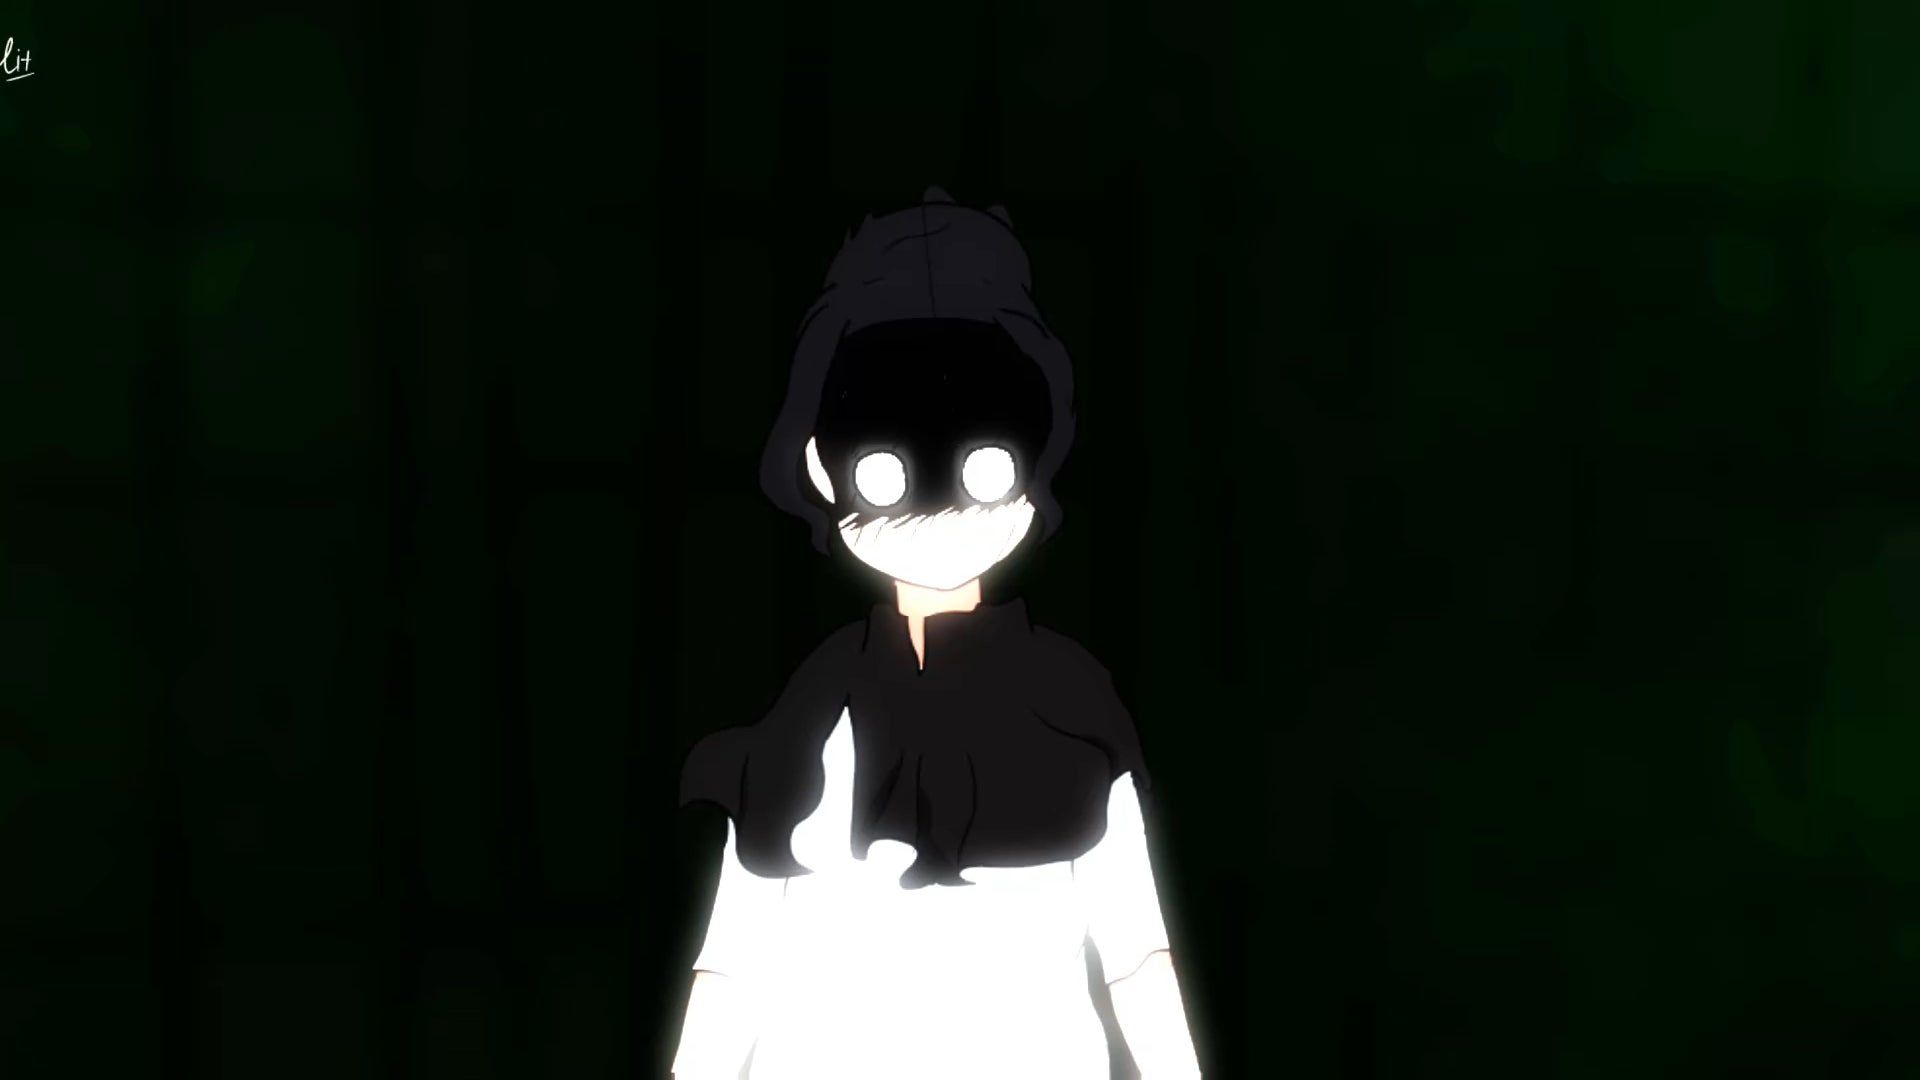 Another Animation I made as hype for Episode 114!!